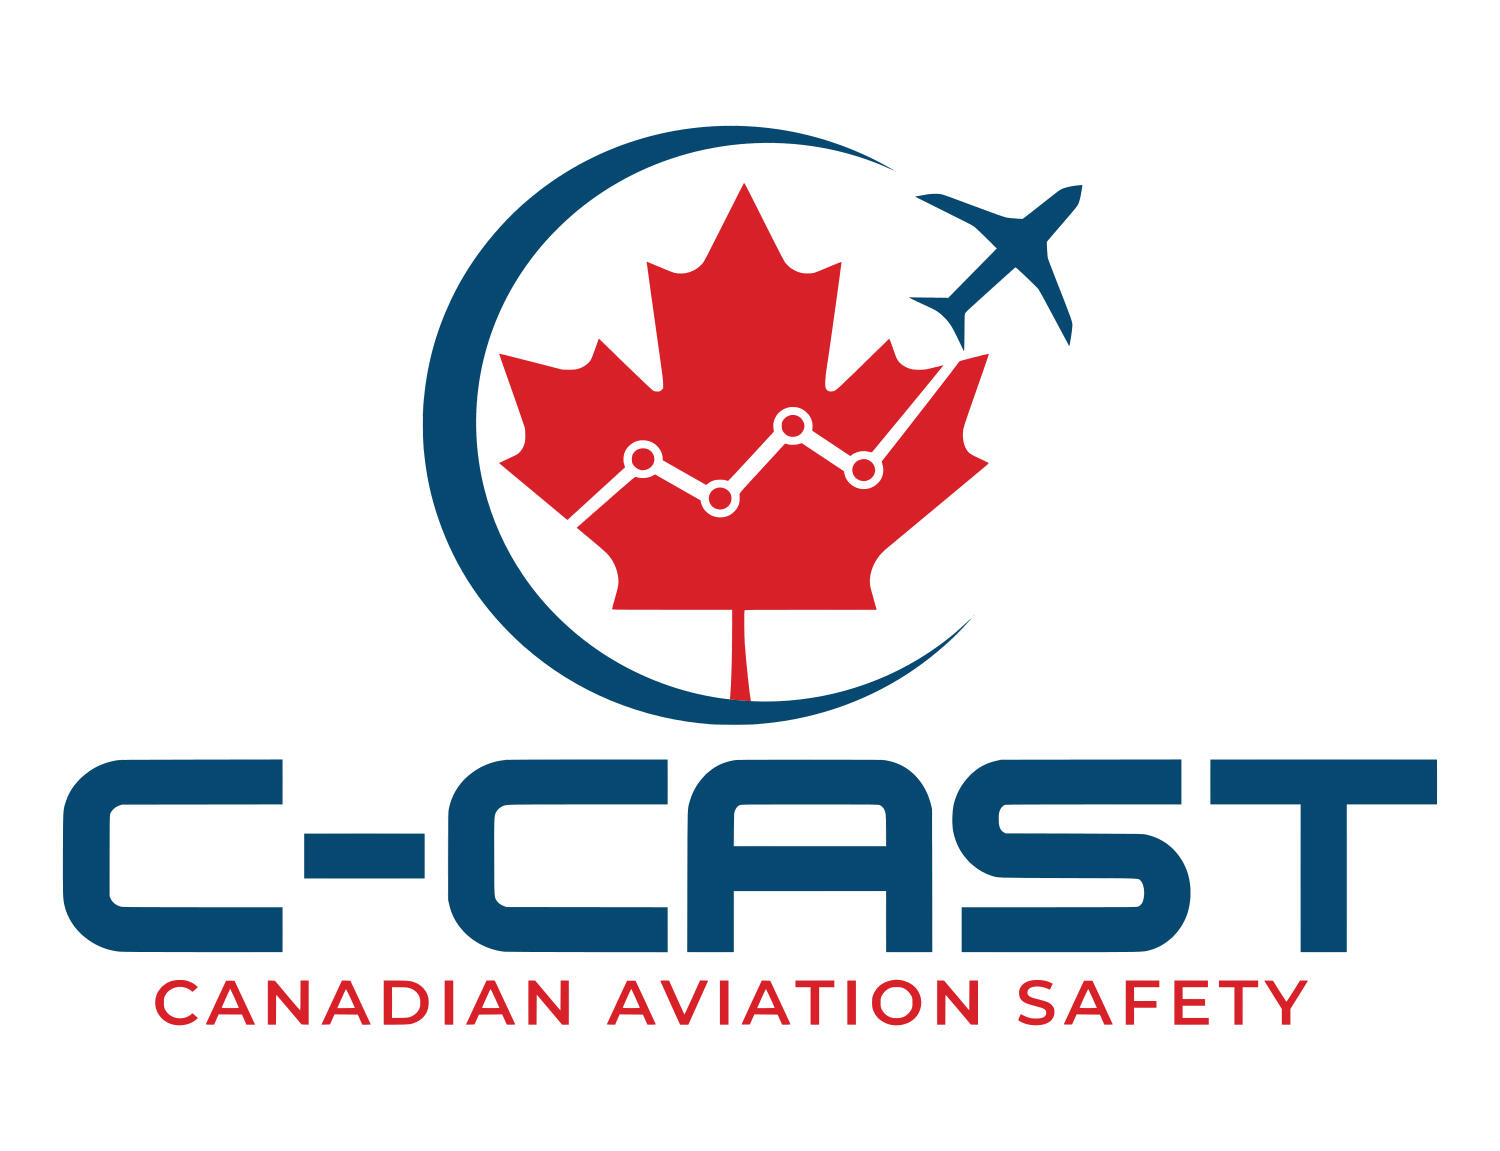 Canadian Commercial Aviation Safety Team logo.